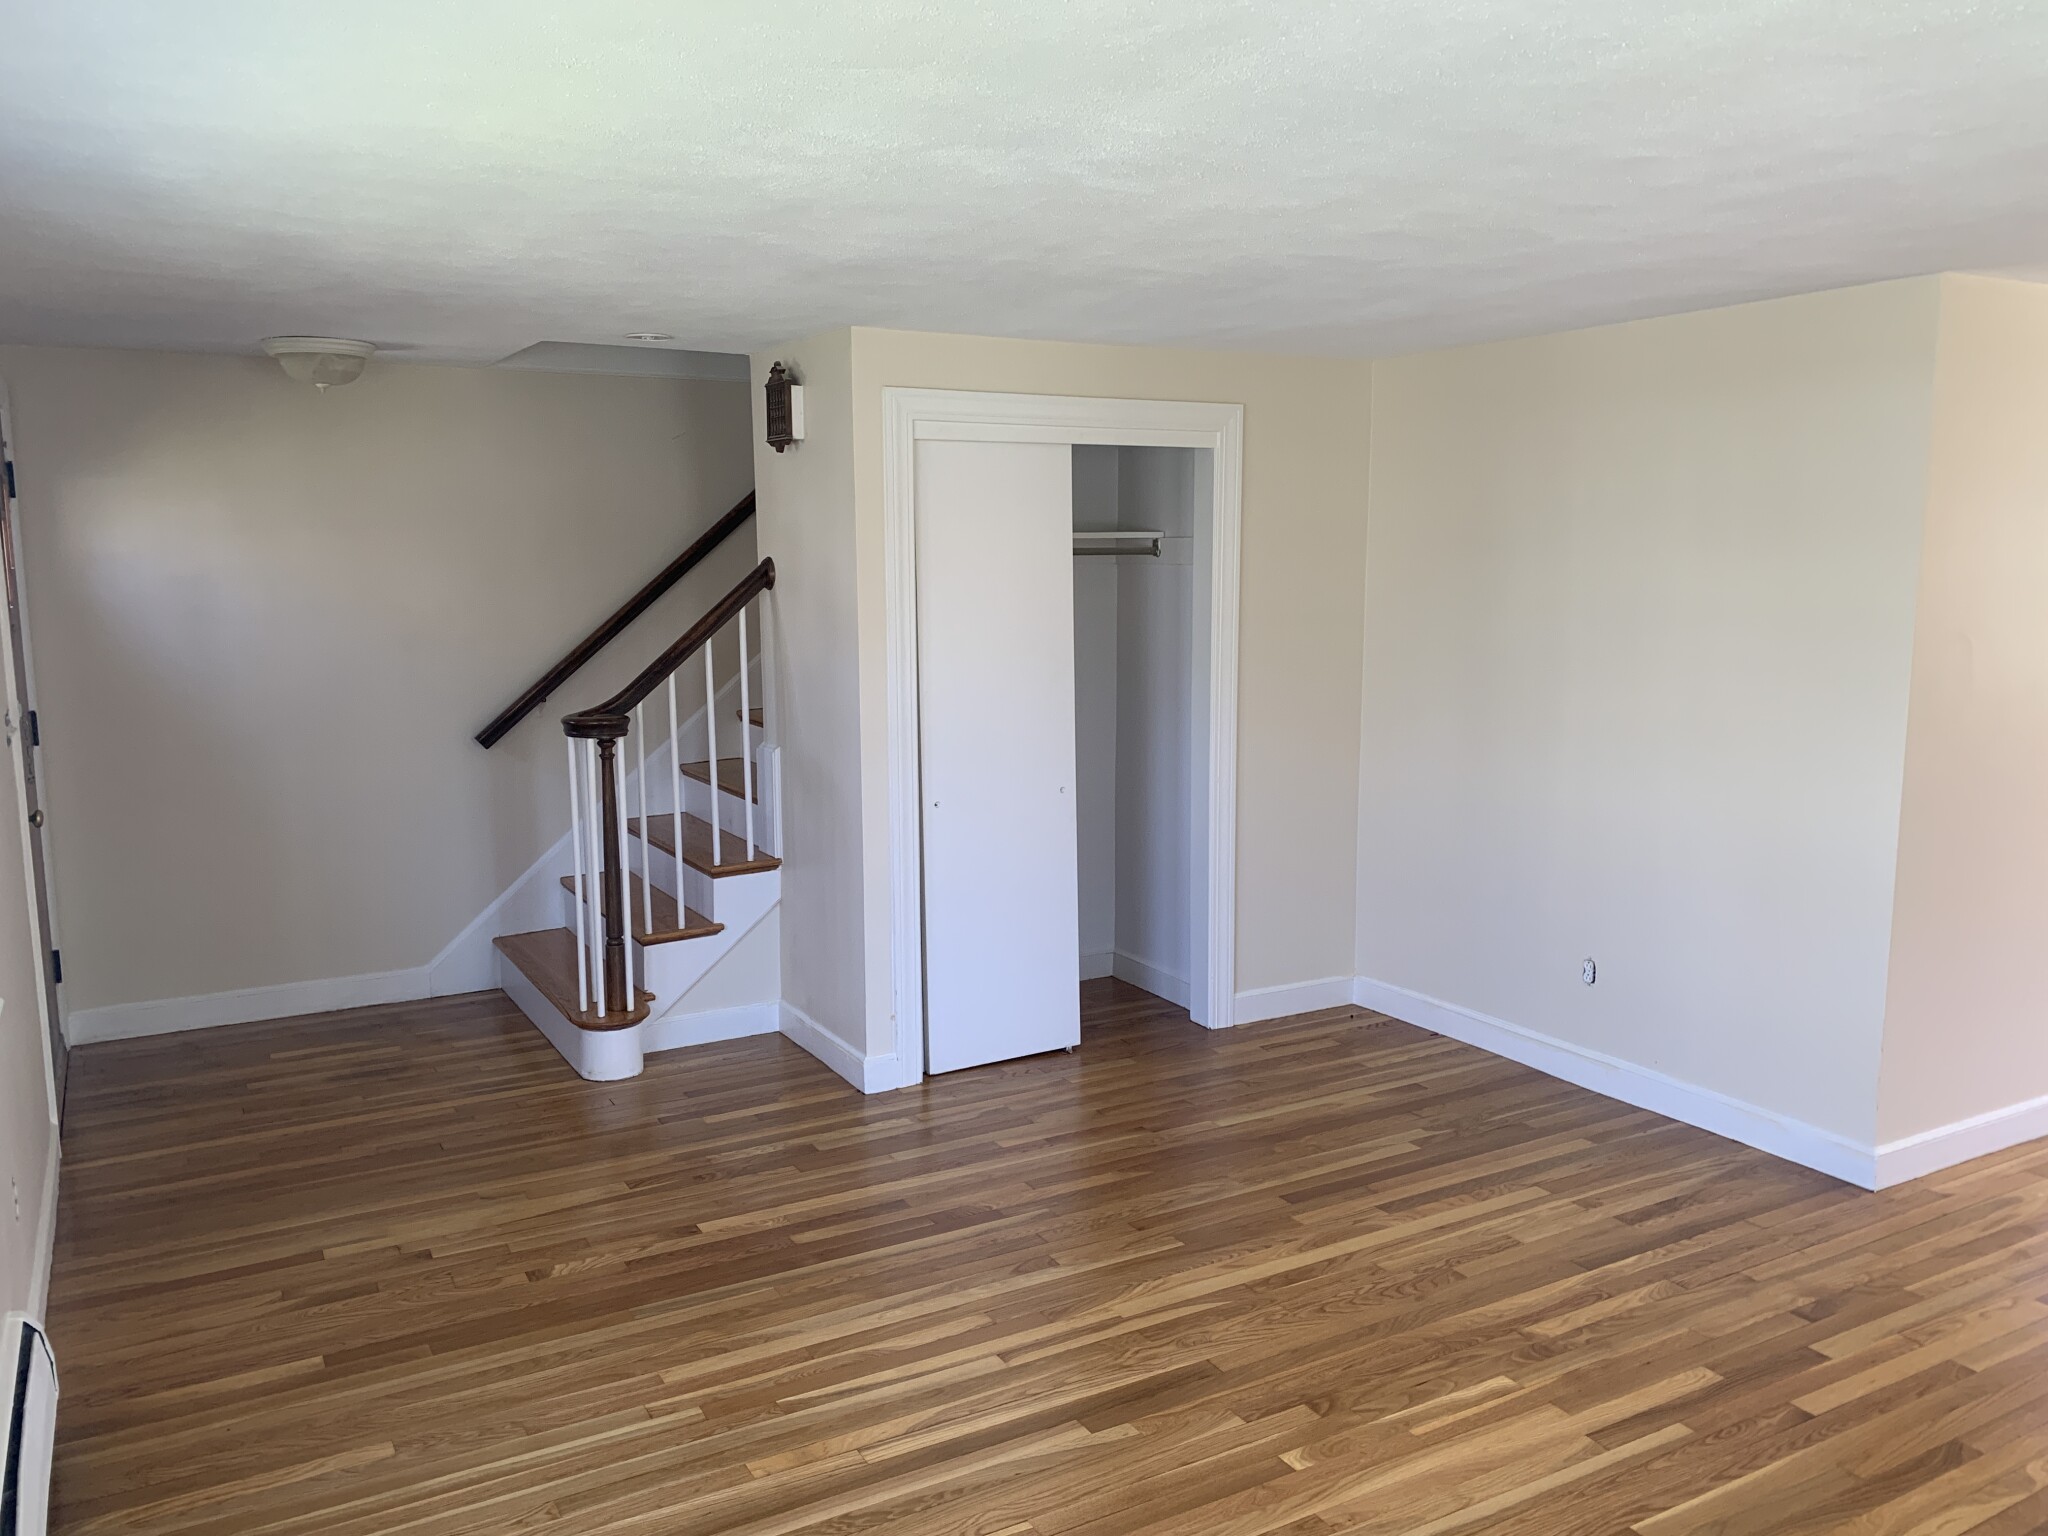 Photos of apartment on Lowell Ave.,Newton MA 02460